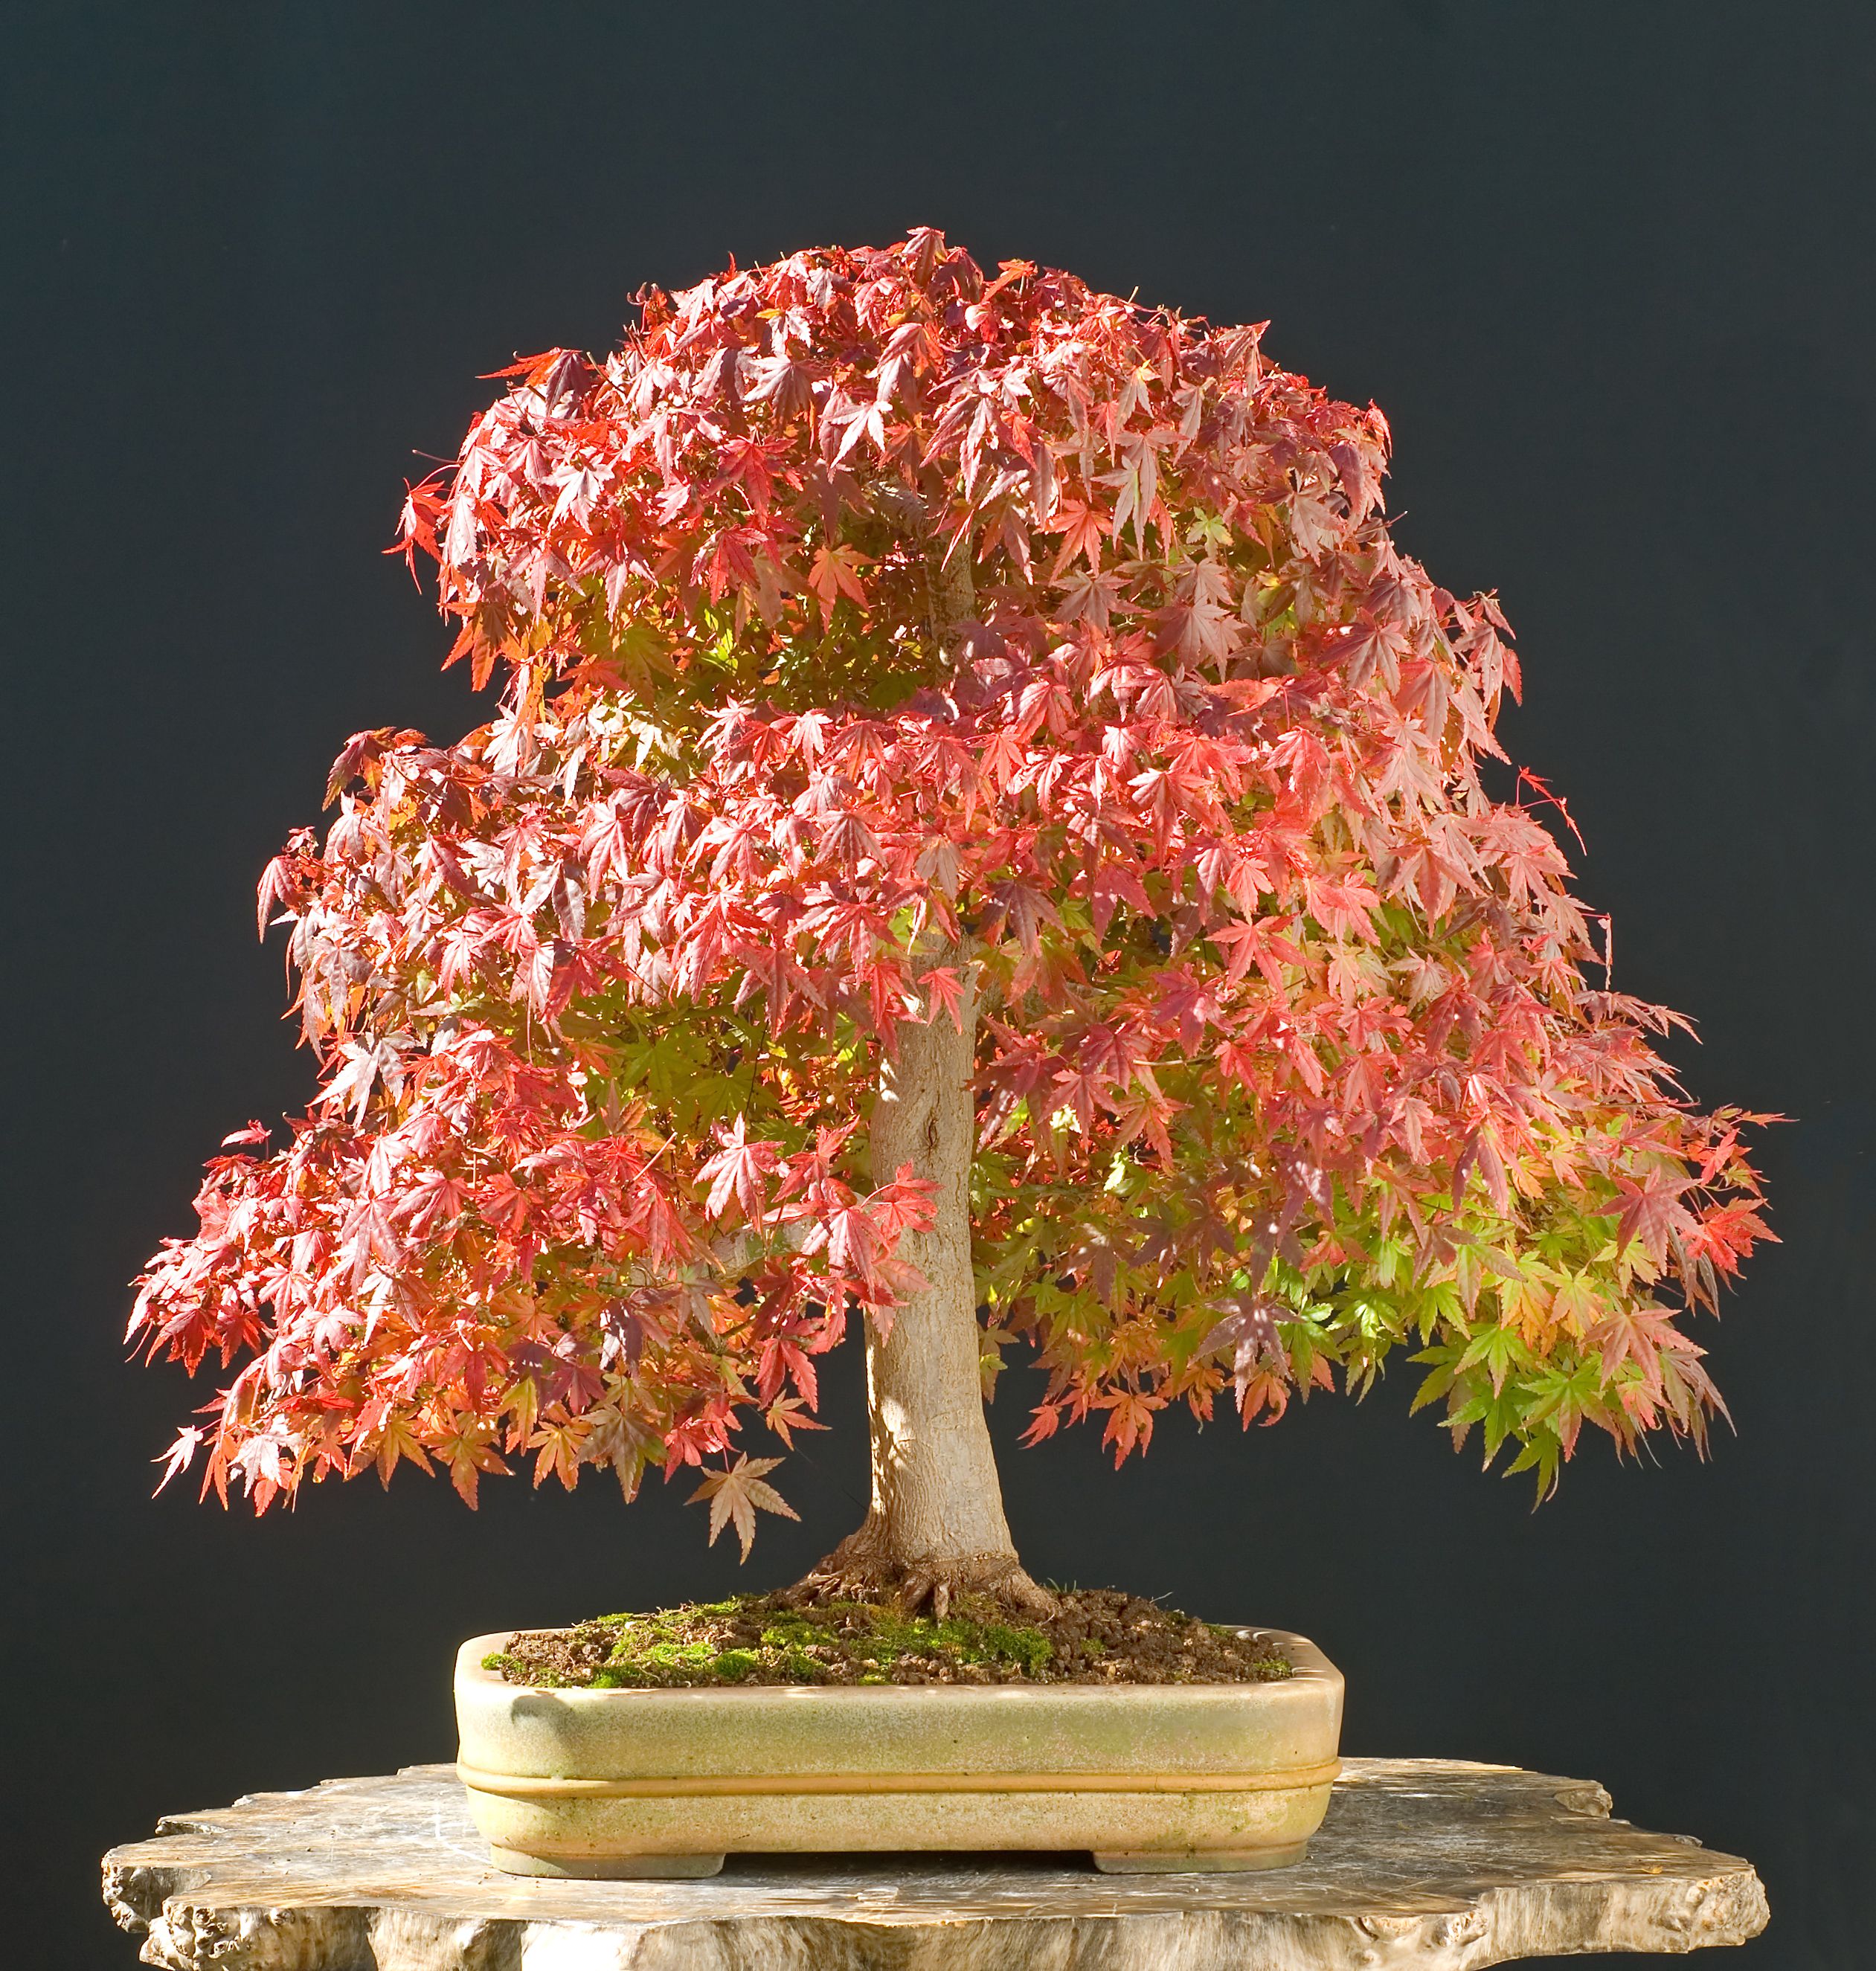 Buy How to Take Care of a Bonsai Tree - Part 3 Japanese Maple Bonsai.